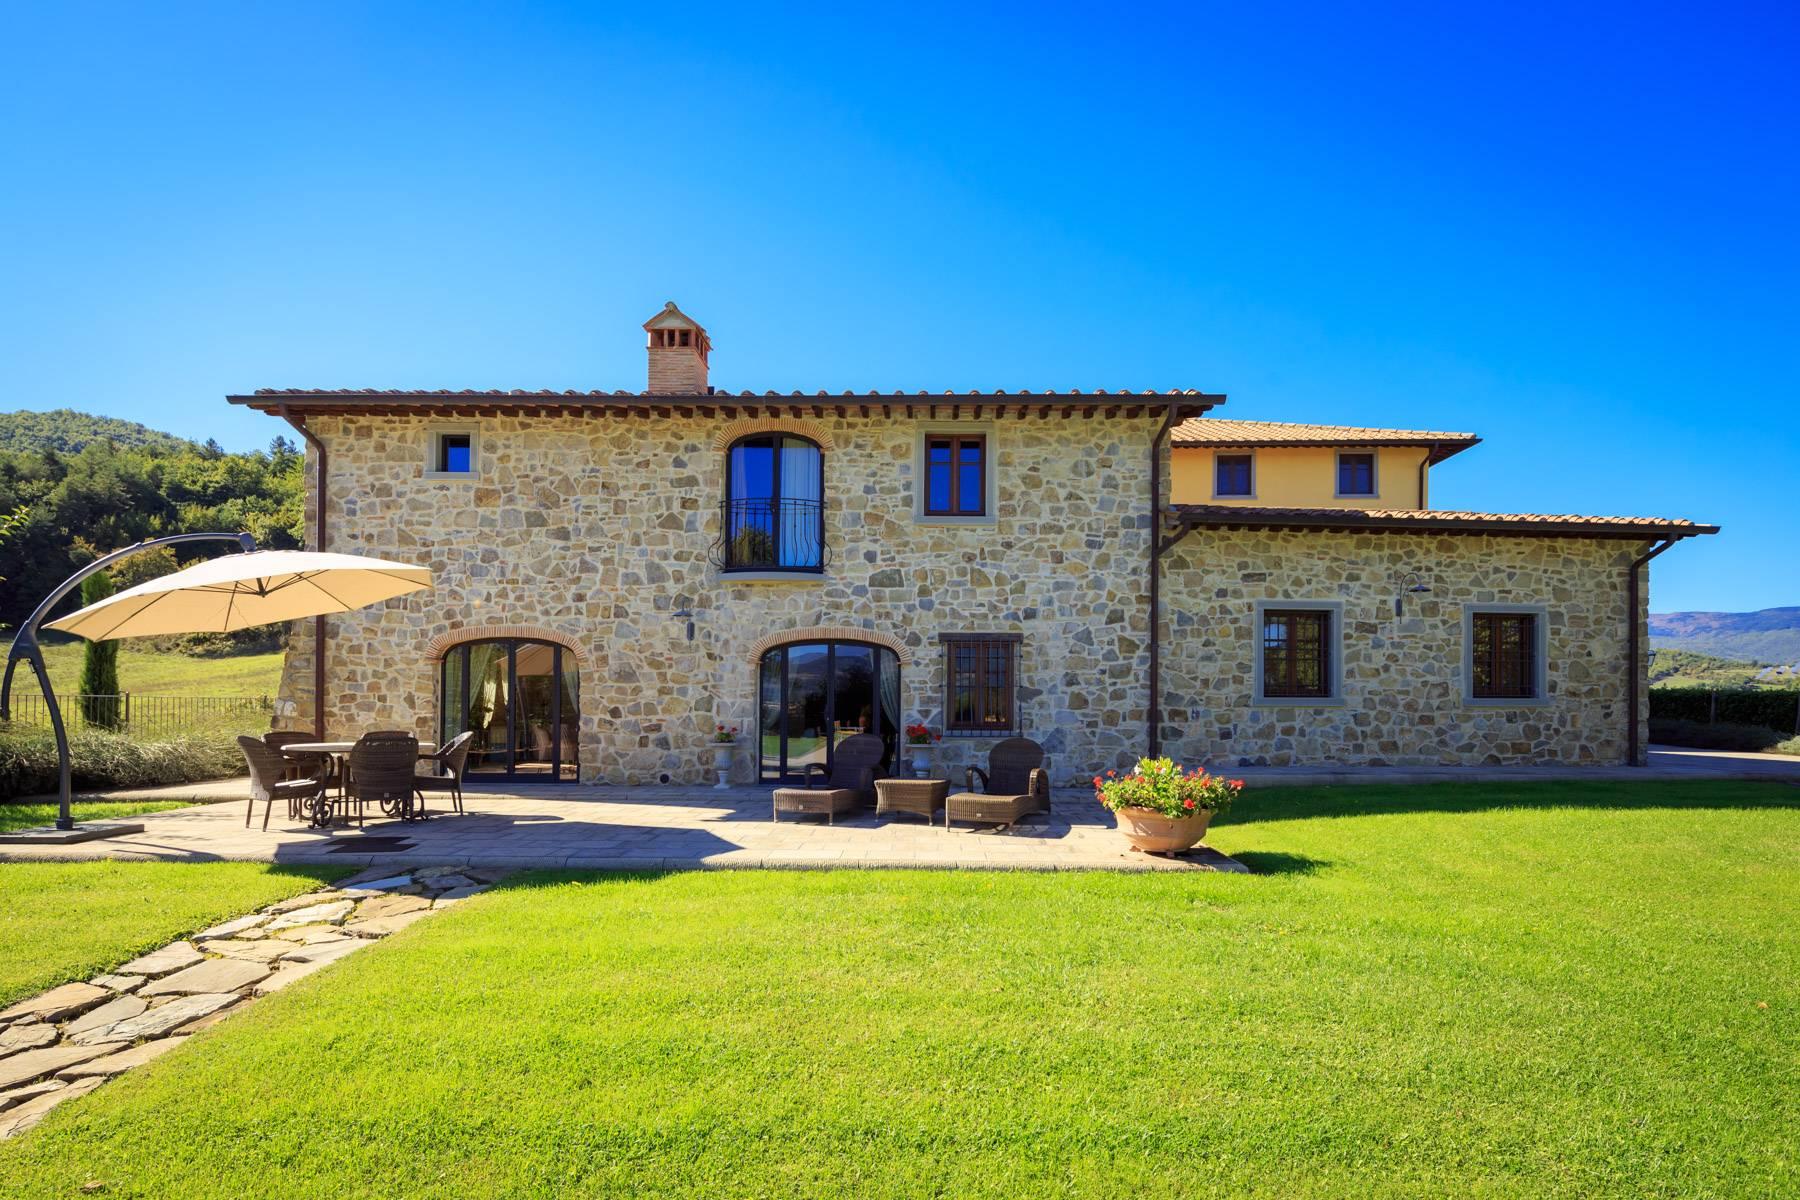 Marvelous estate with views over the Casentino valley - 3